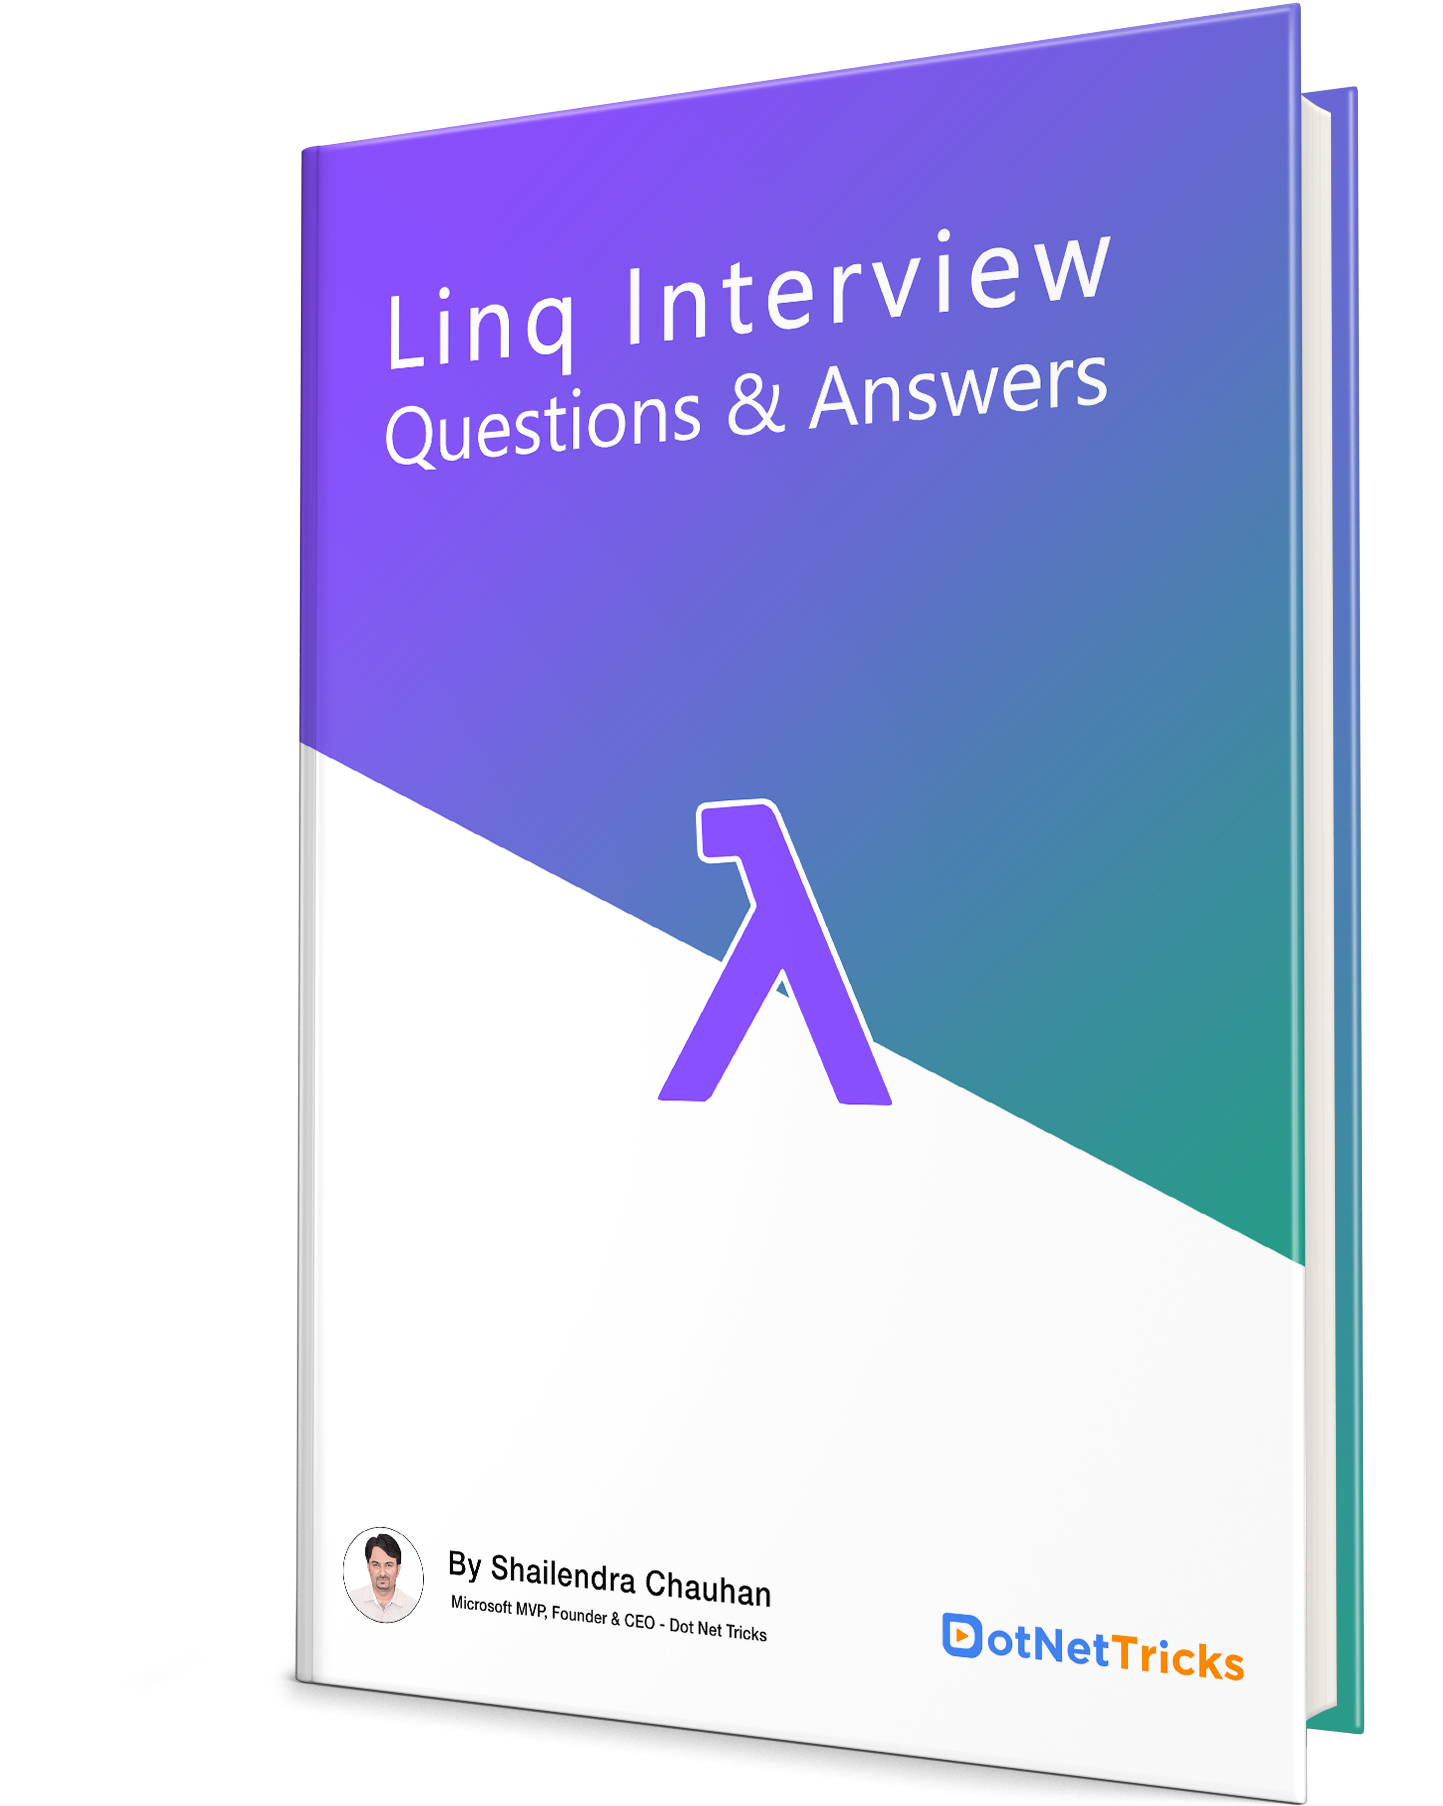 LINQ Interview Questions and Answers Book